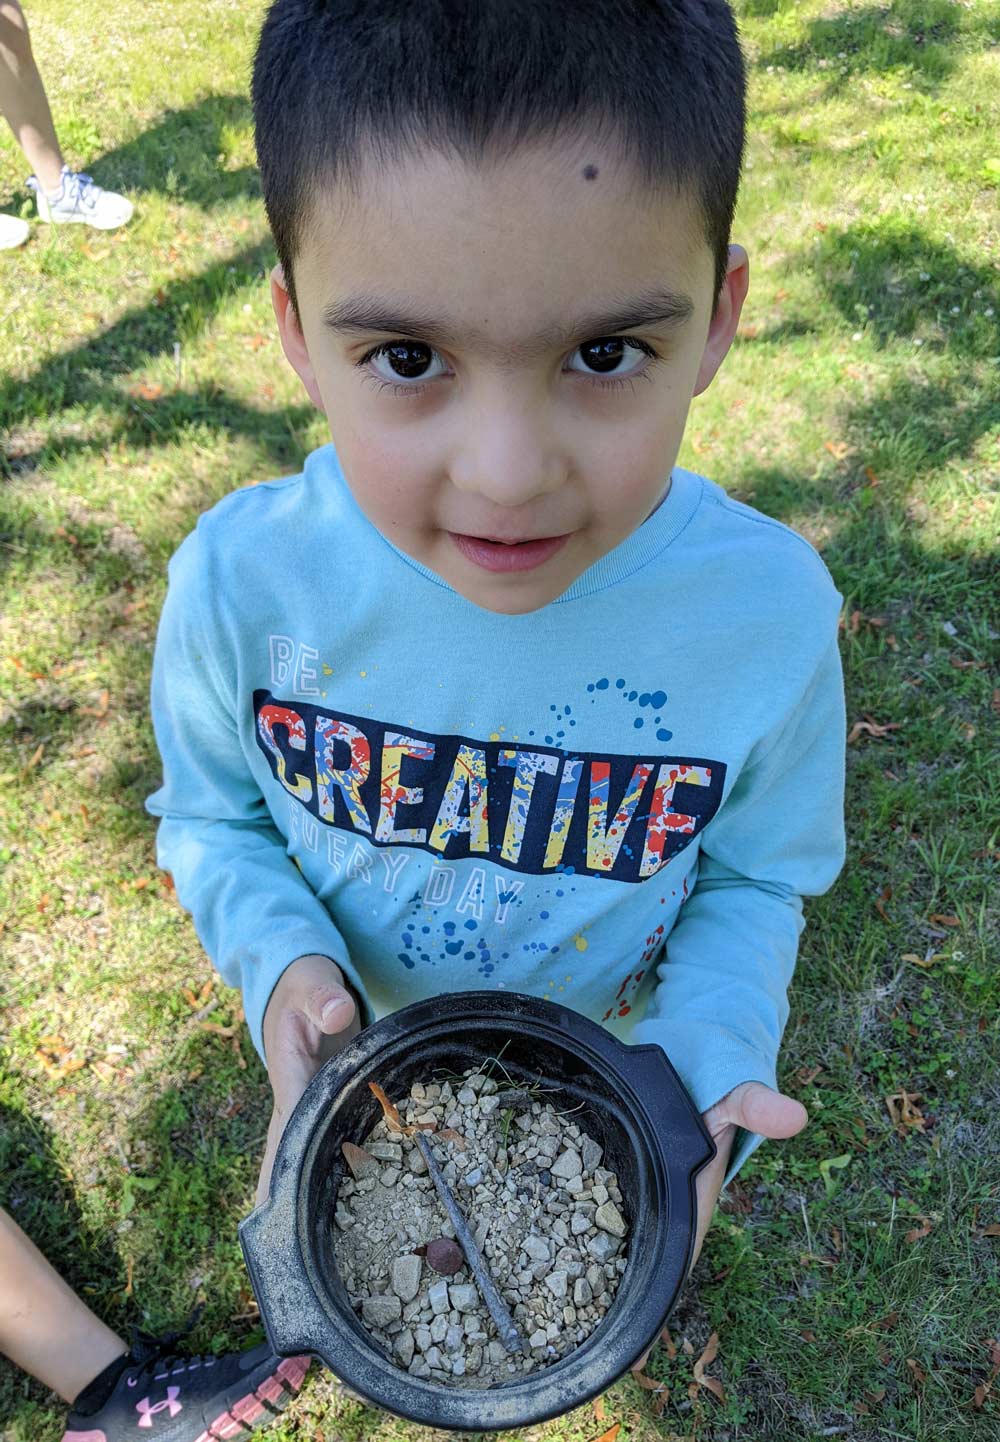 young camper collecting items from nature into a bowl